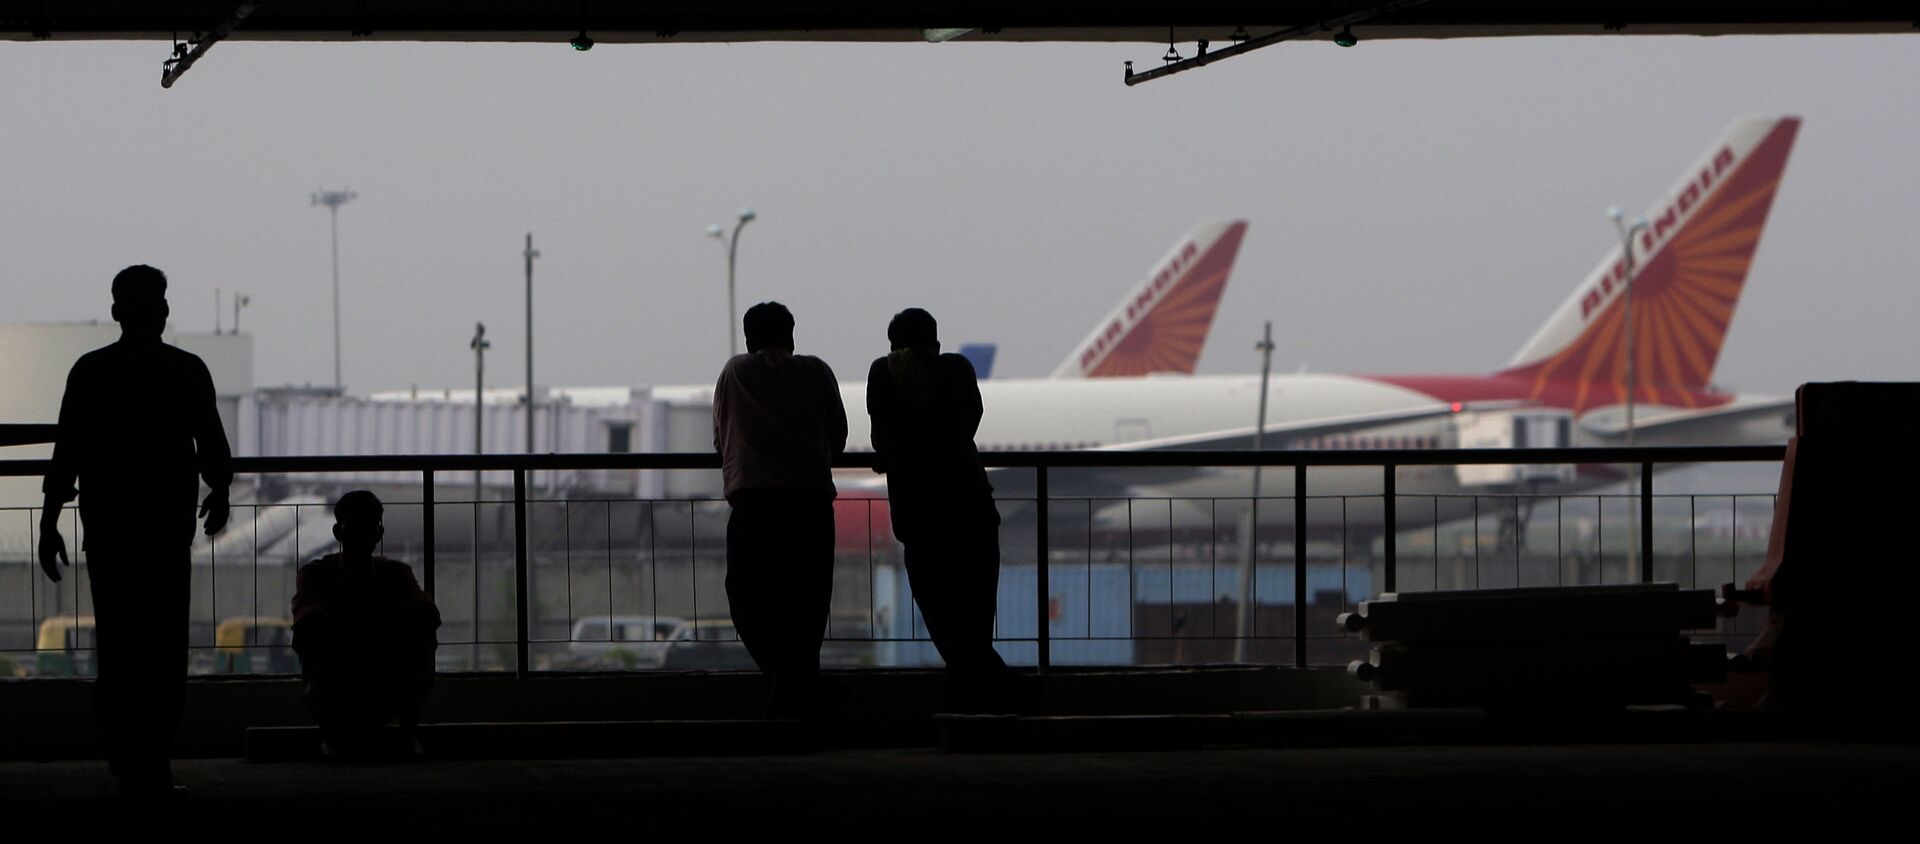 People watch aircraft from the multi-storied parking lot of the terminal 3 of the Indira Gandhi International Airport, in New Delhi, India, Thursday, July 15, 2010 - Sputnik International, 1920, 06.03.2021